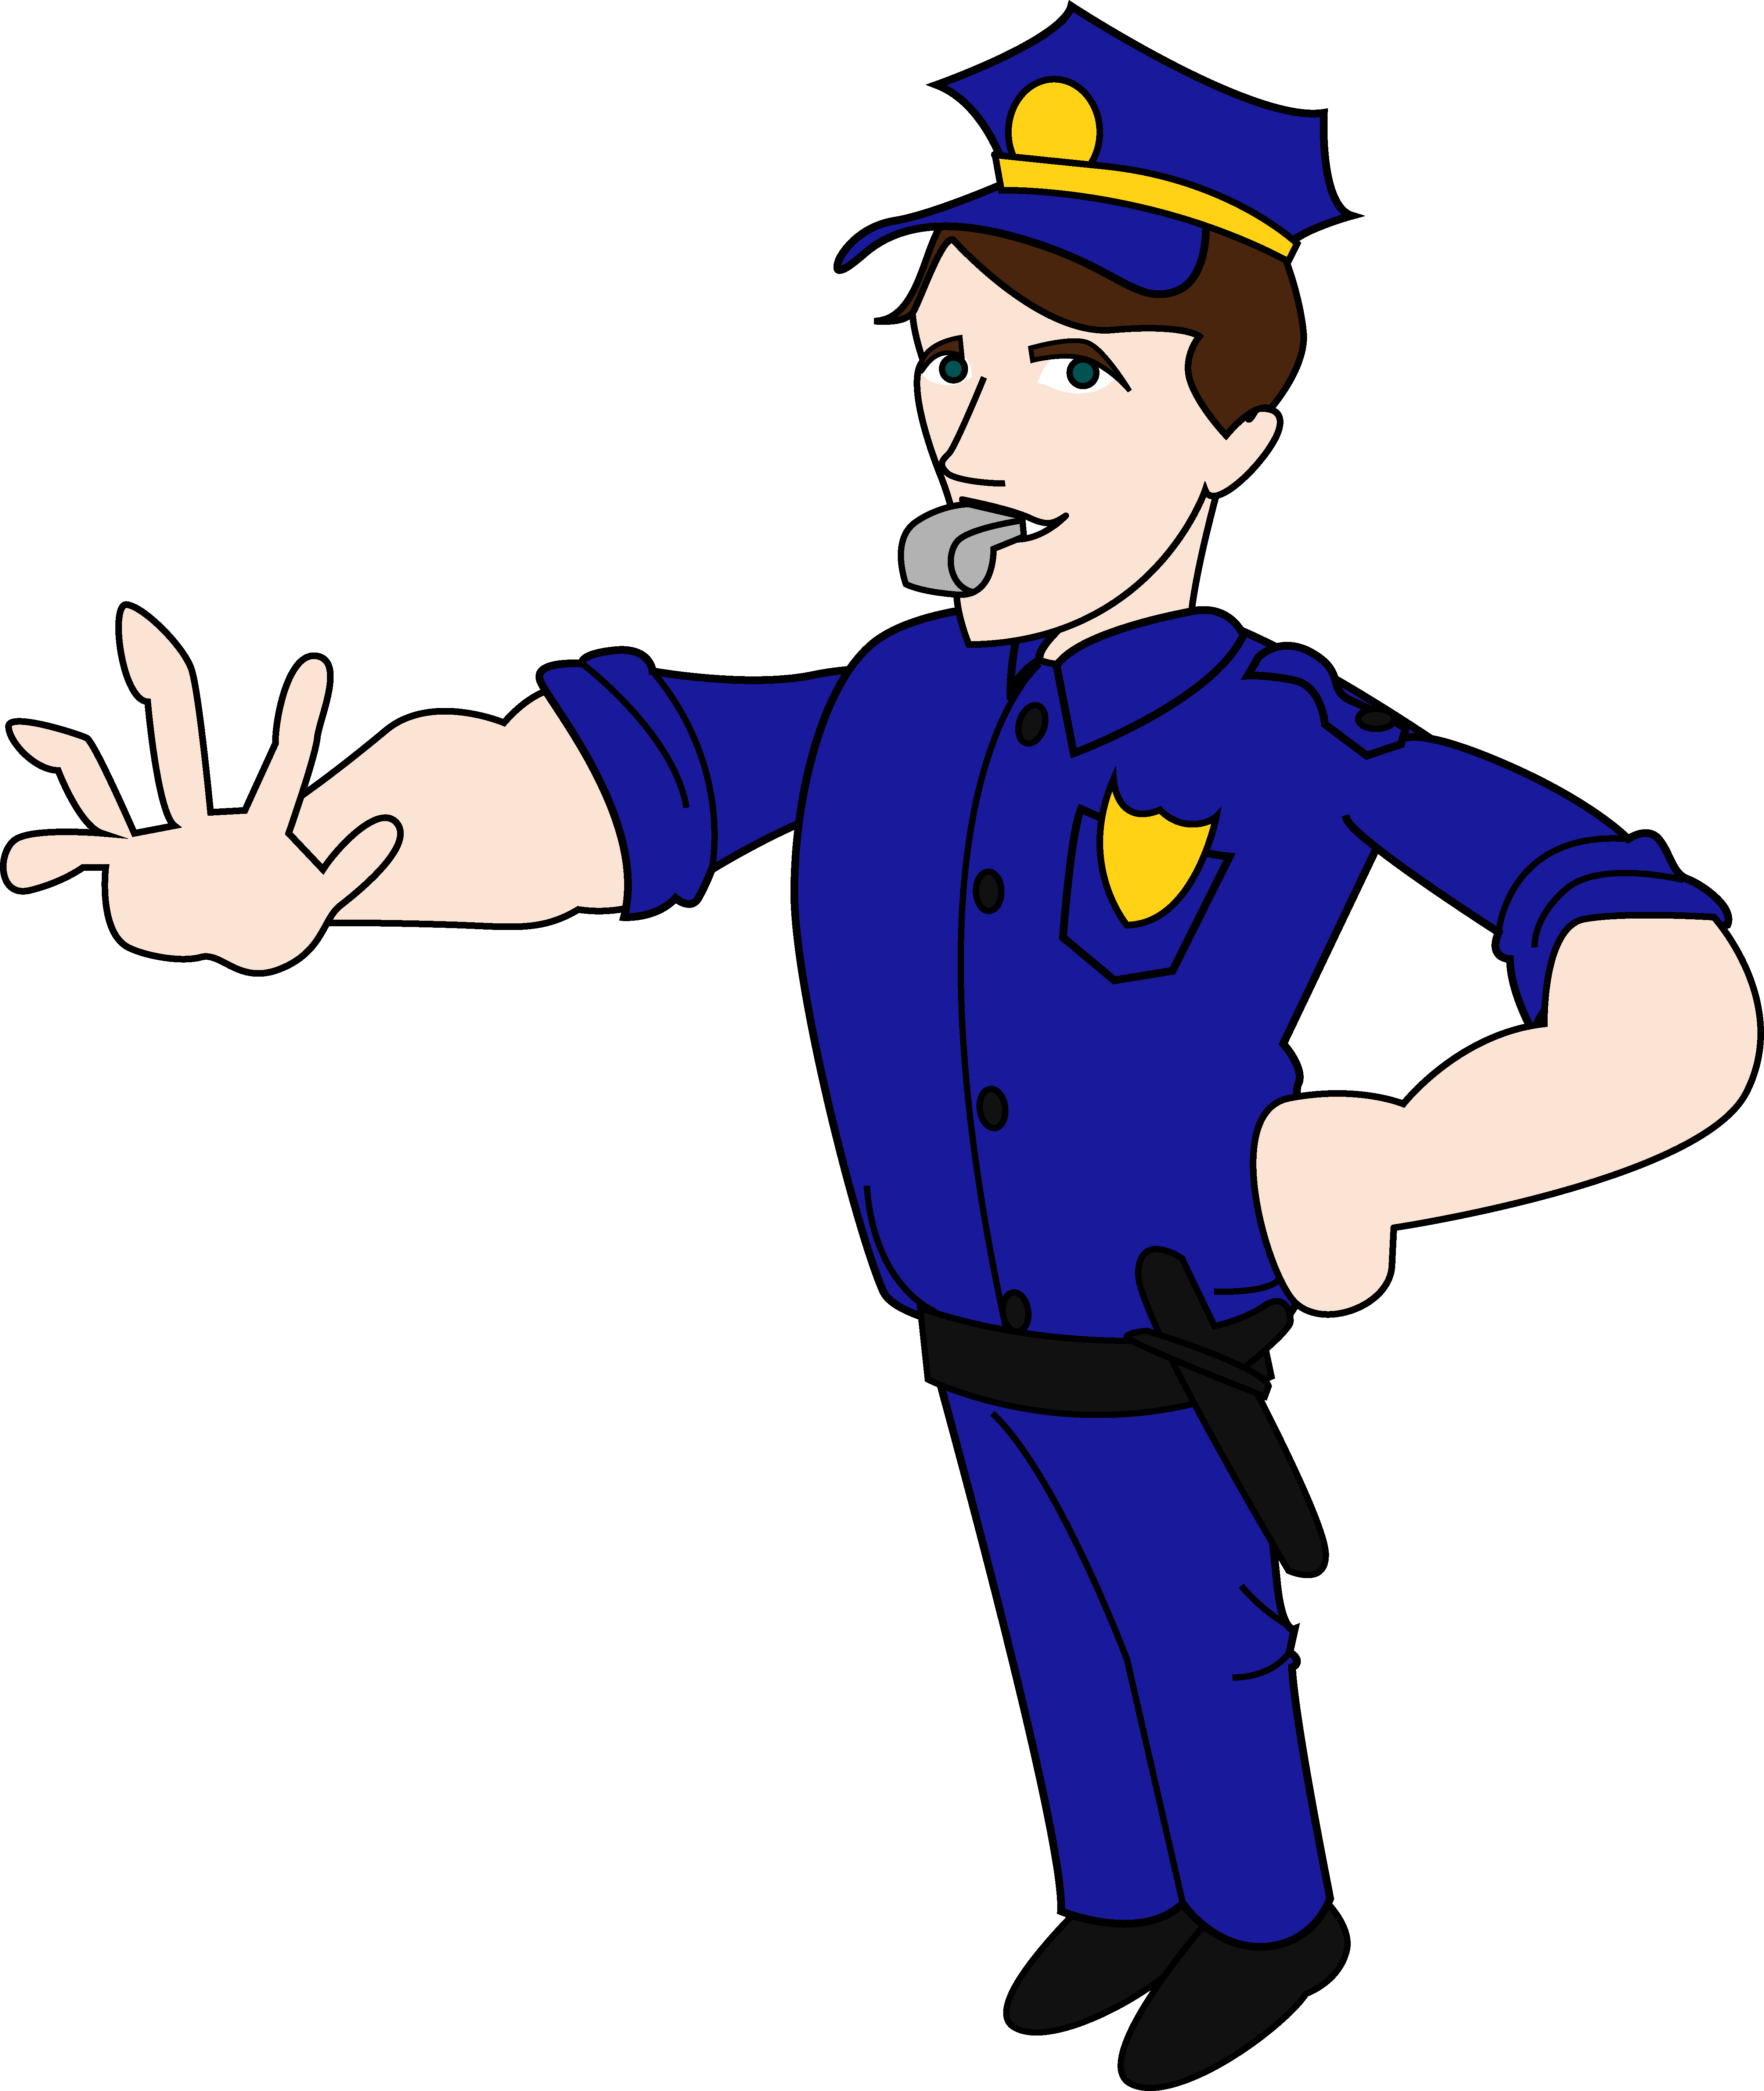 Screwdriver clipart cartoon.  collection of police